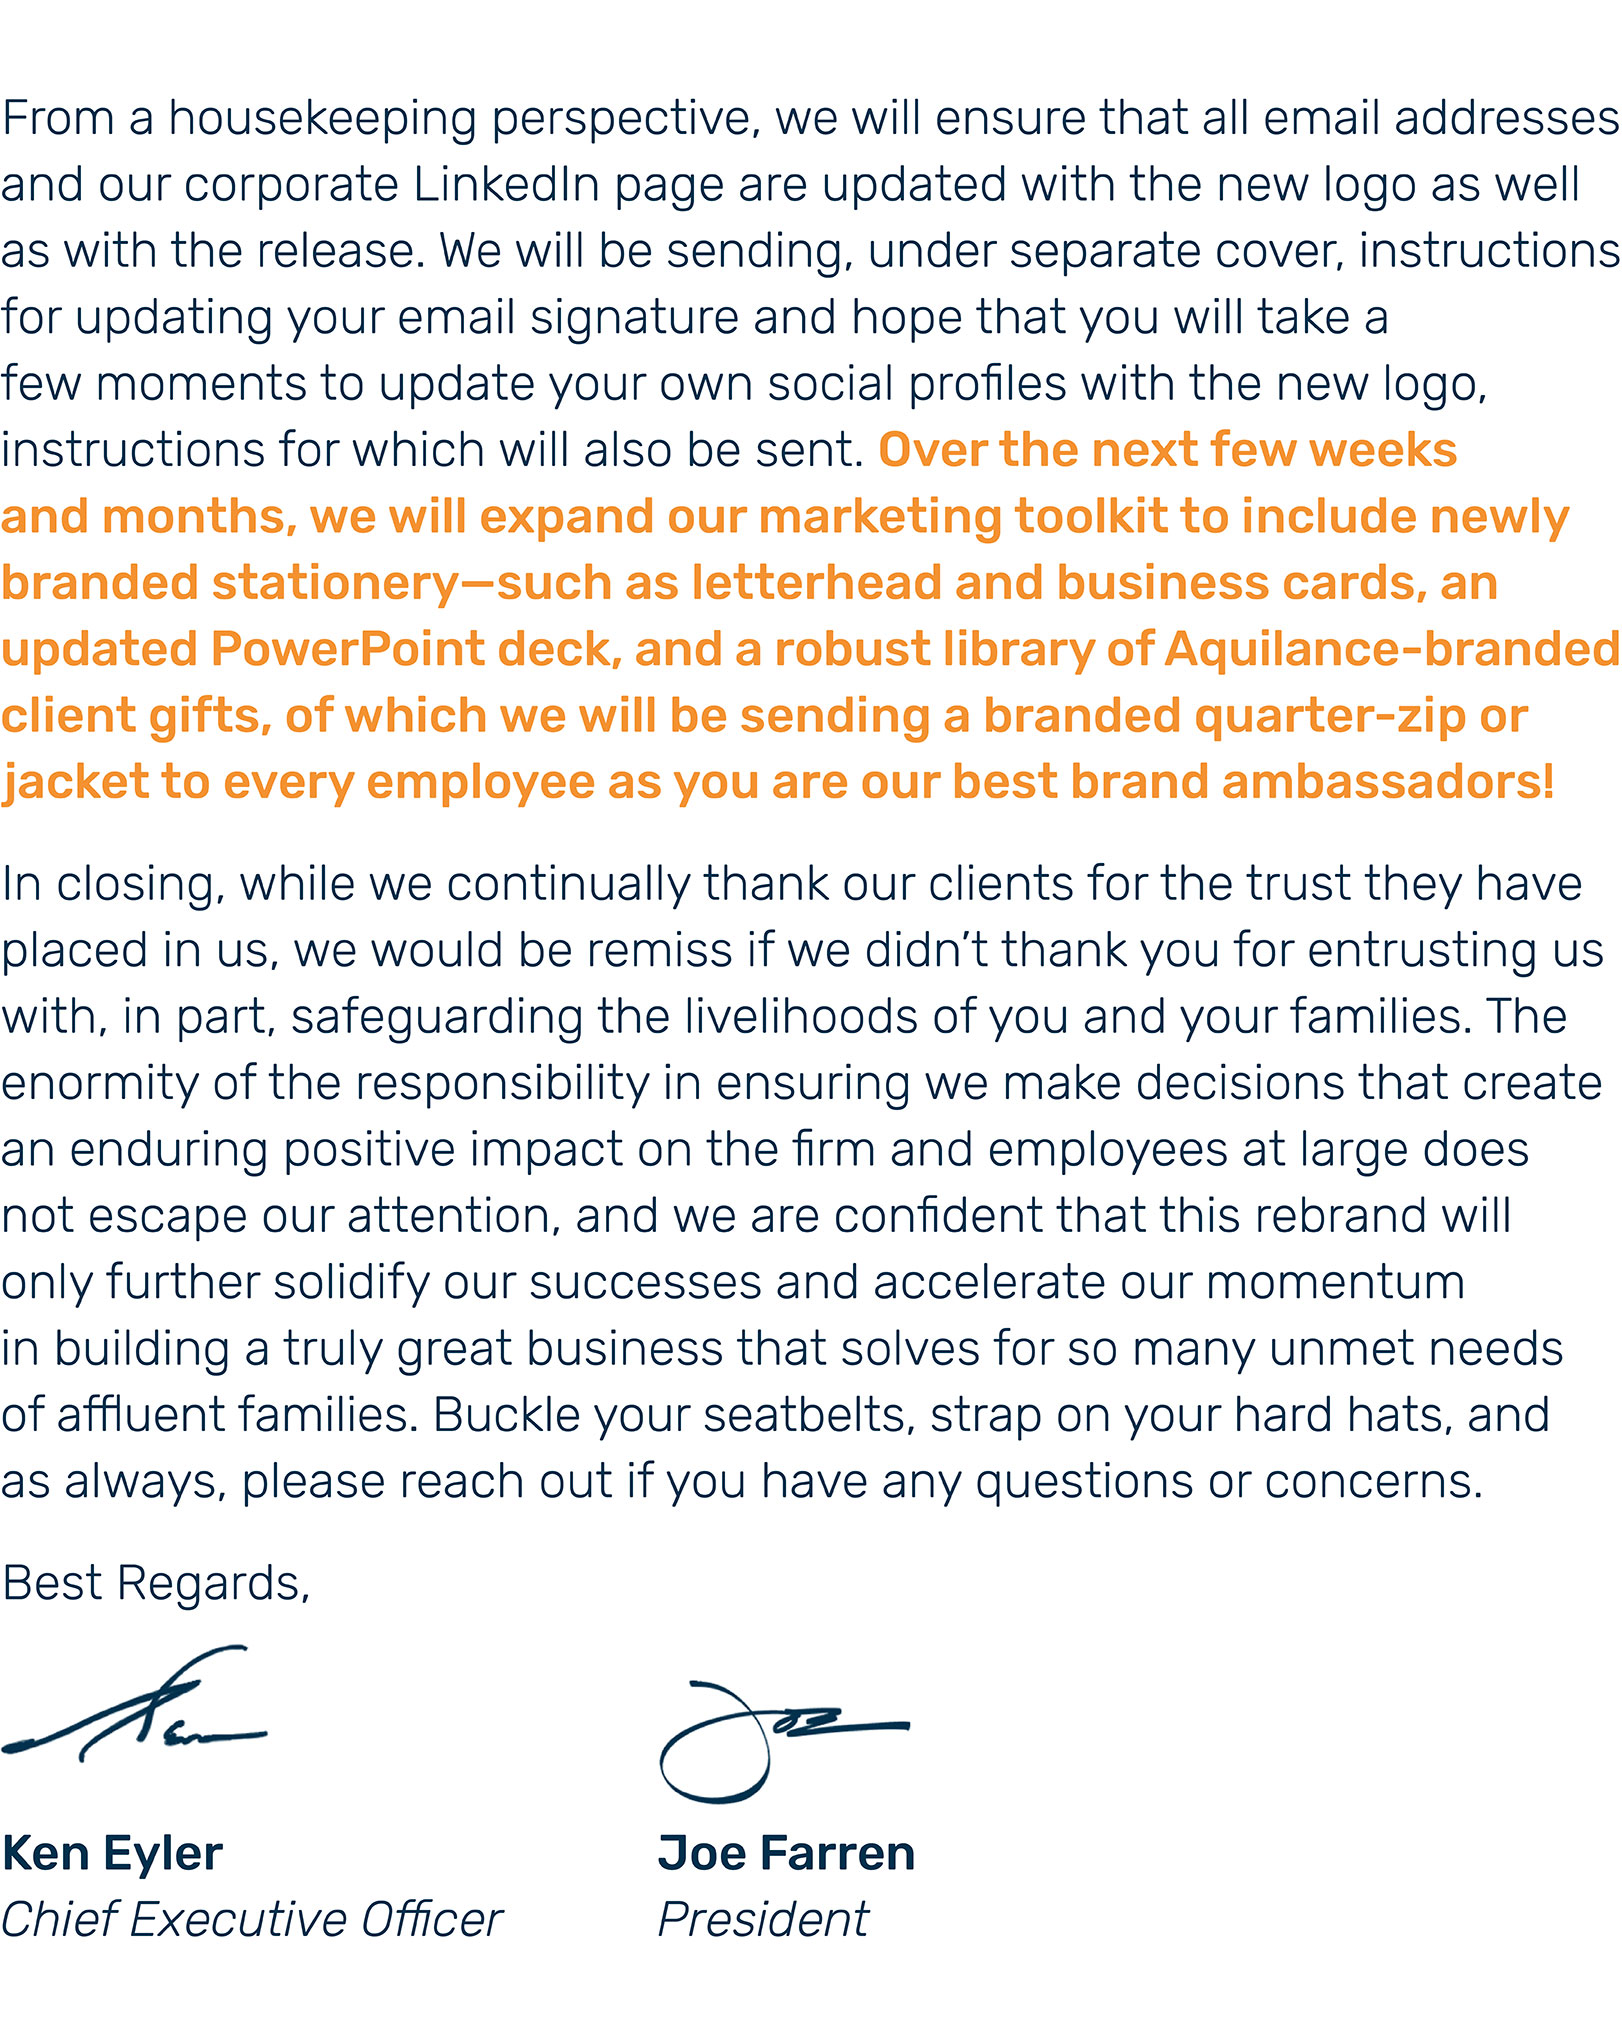 We look forward to speaking with you about the evolution of our business, a note from Ken Eyler and Joe Farren of Aquilance